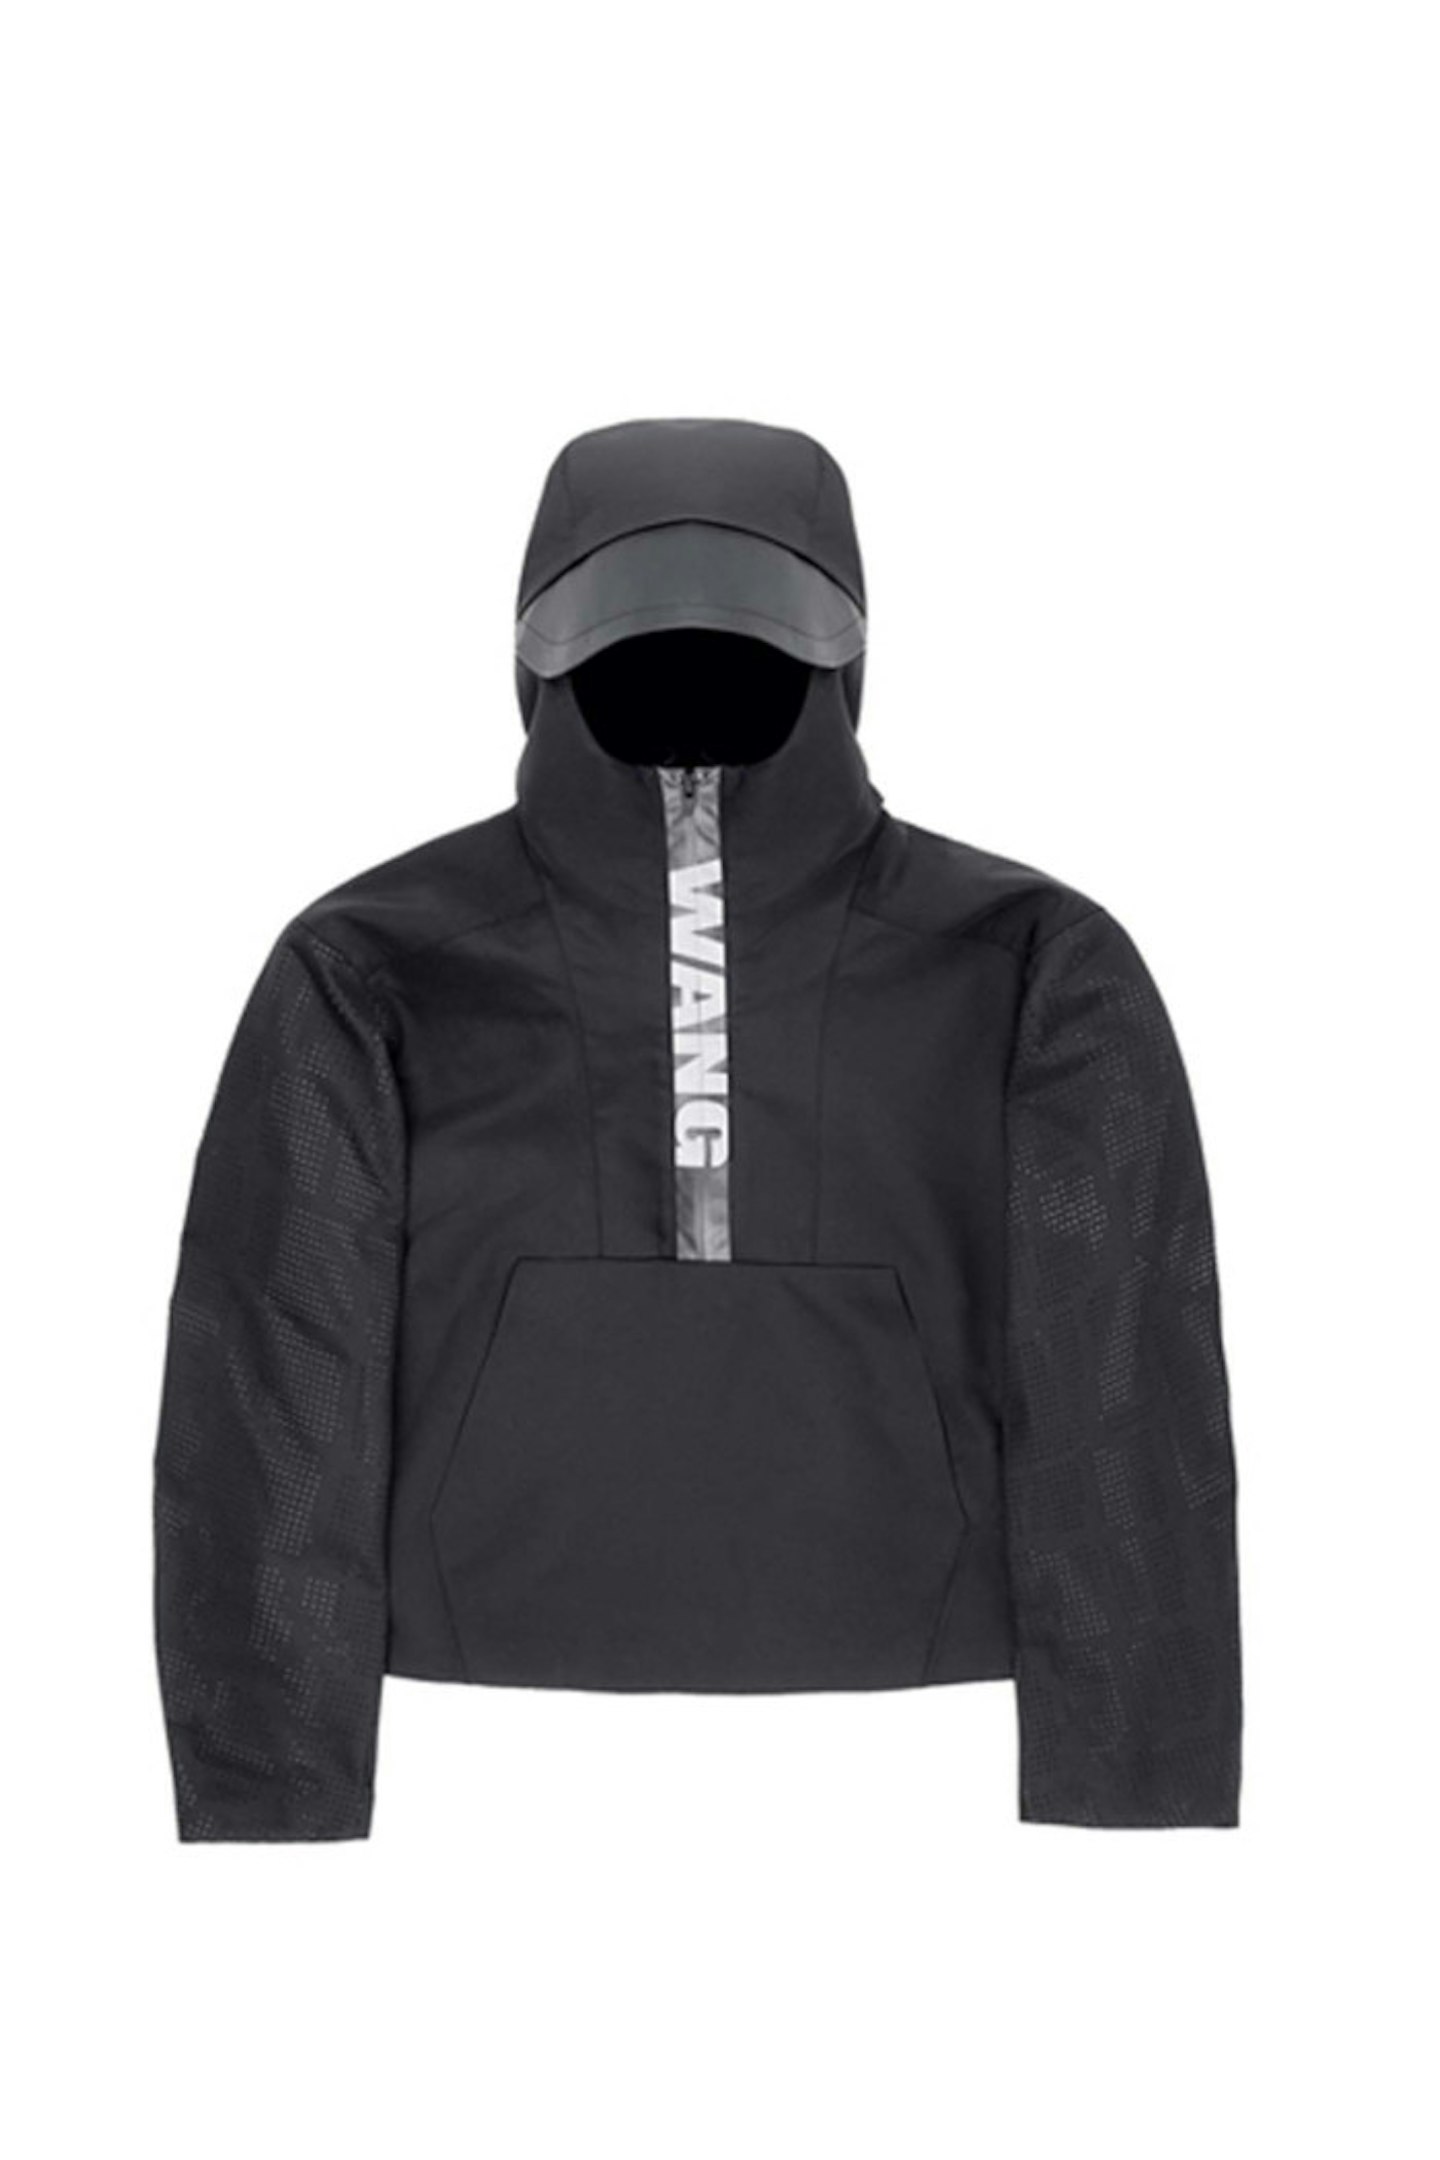 Hooded Jacket £99.99 by Alexander Wang x H&M